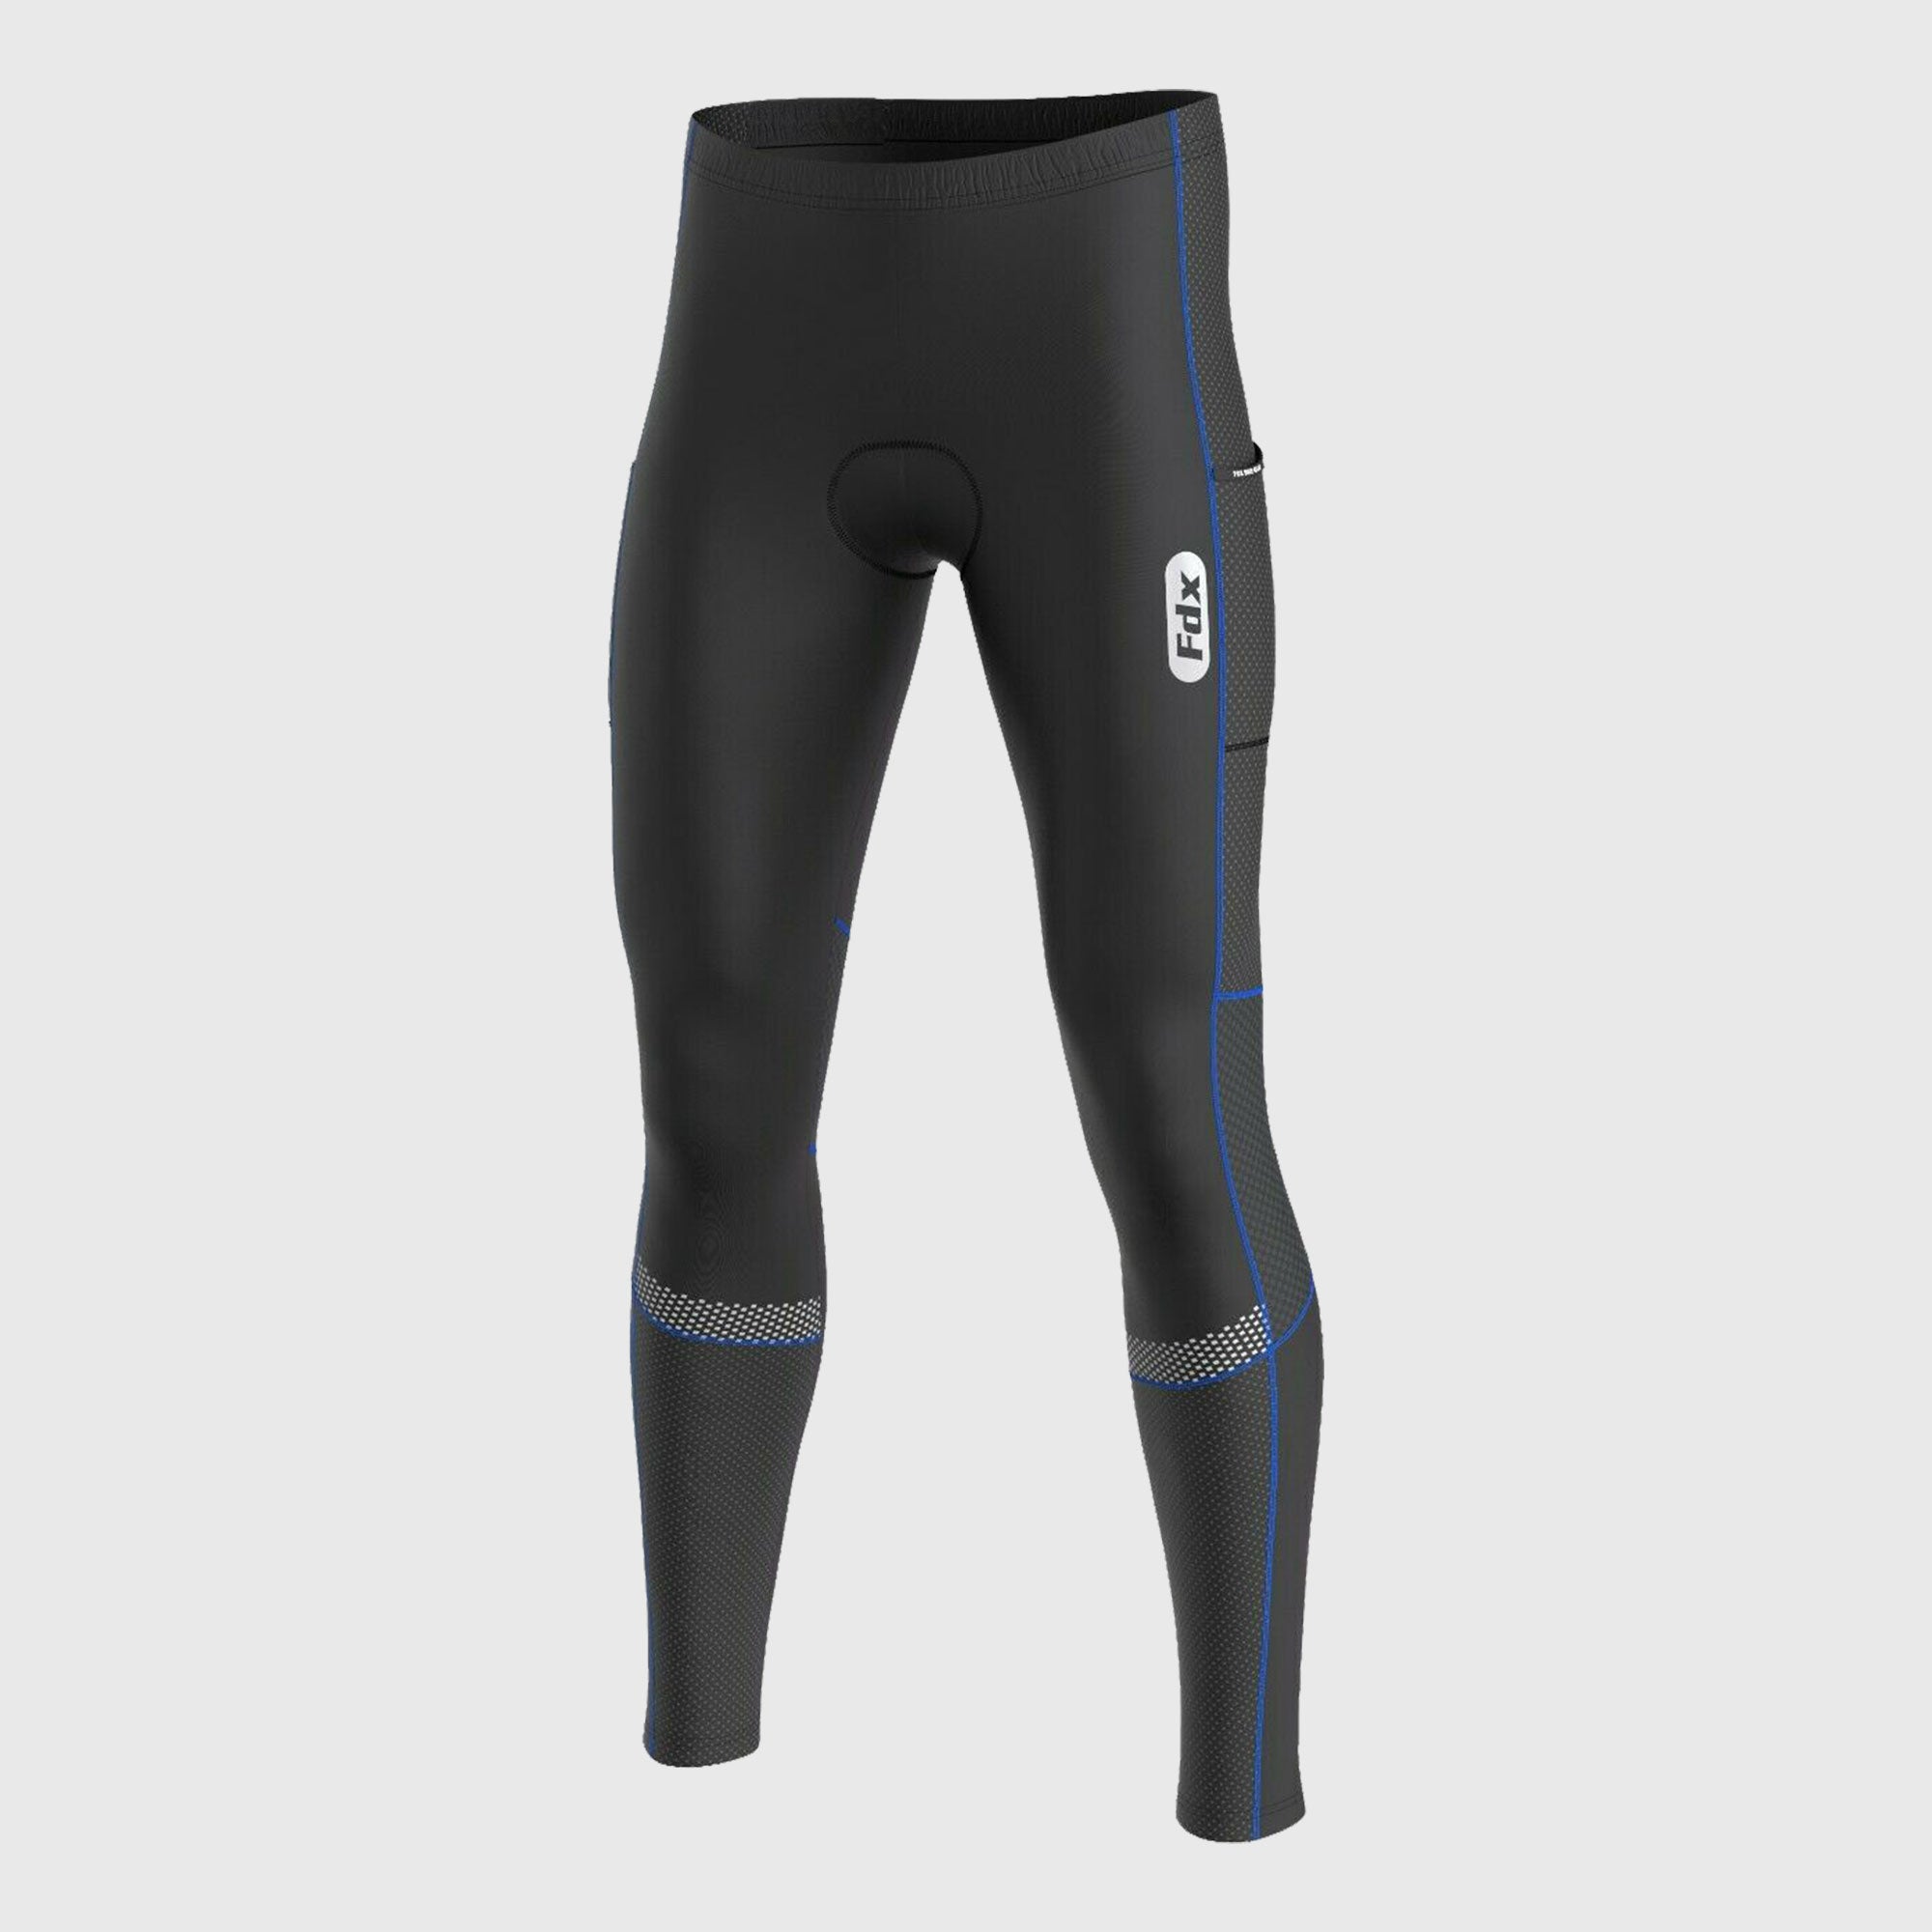 Fdx Mens Blue Chamois Gel Padded Cycling Tights For Winter Roubaix Thermal Fleece Reflective Warm Leggings - All Day Bike Long Pants